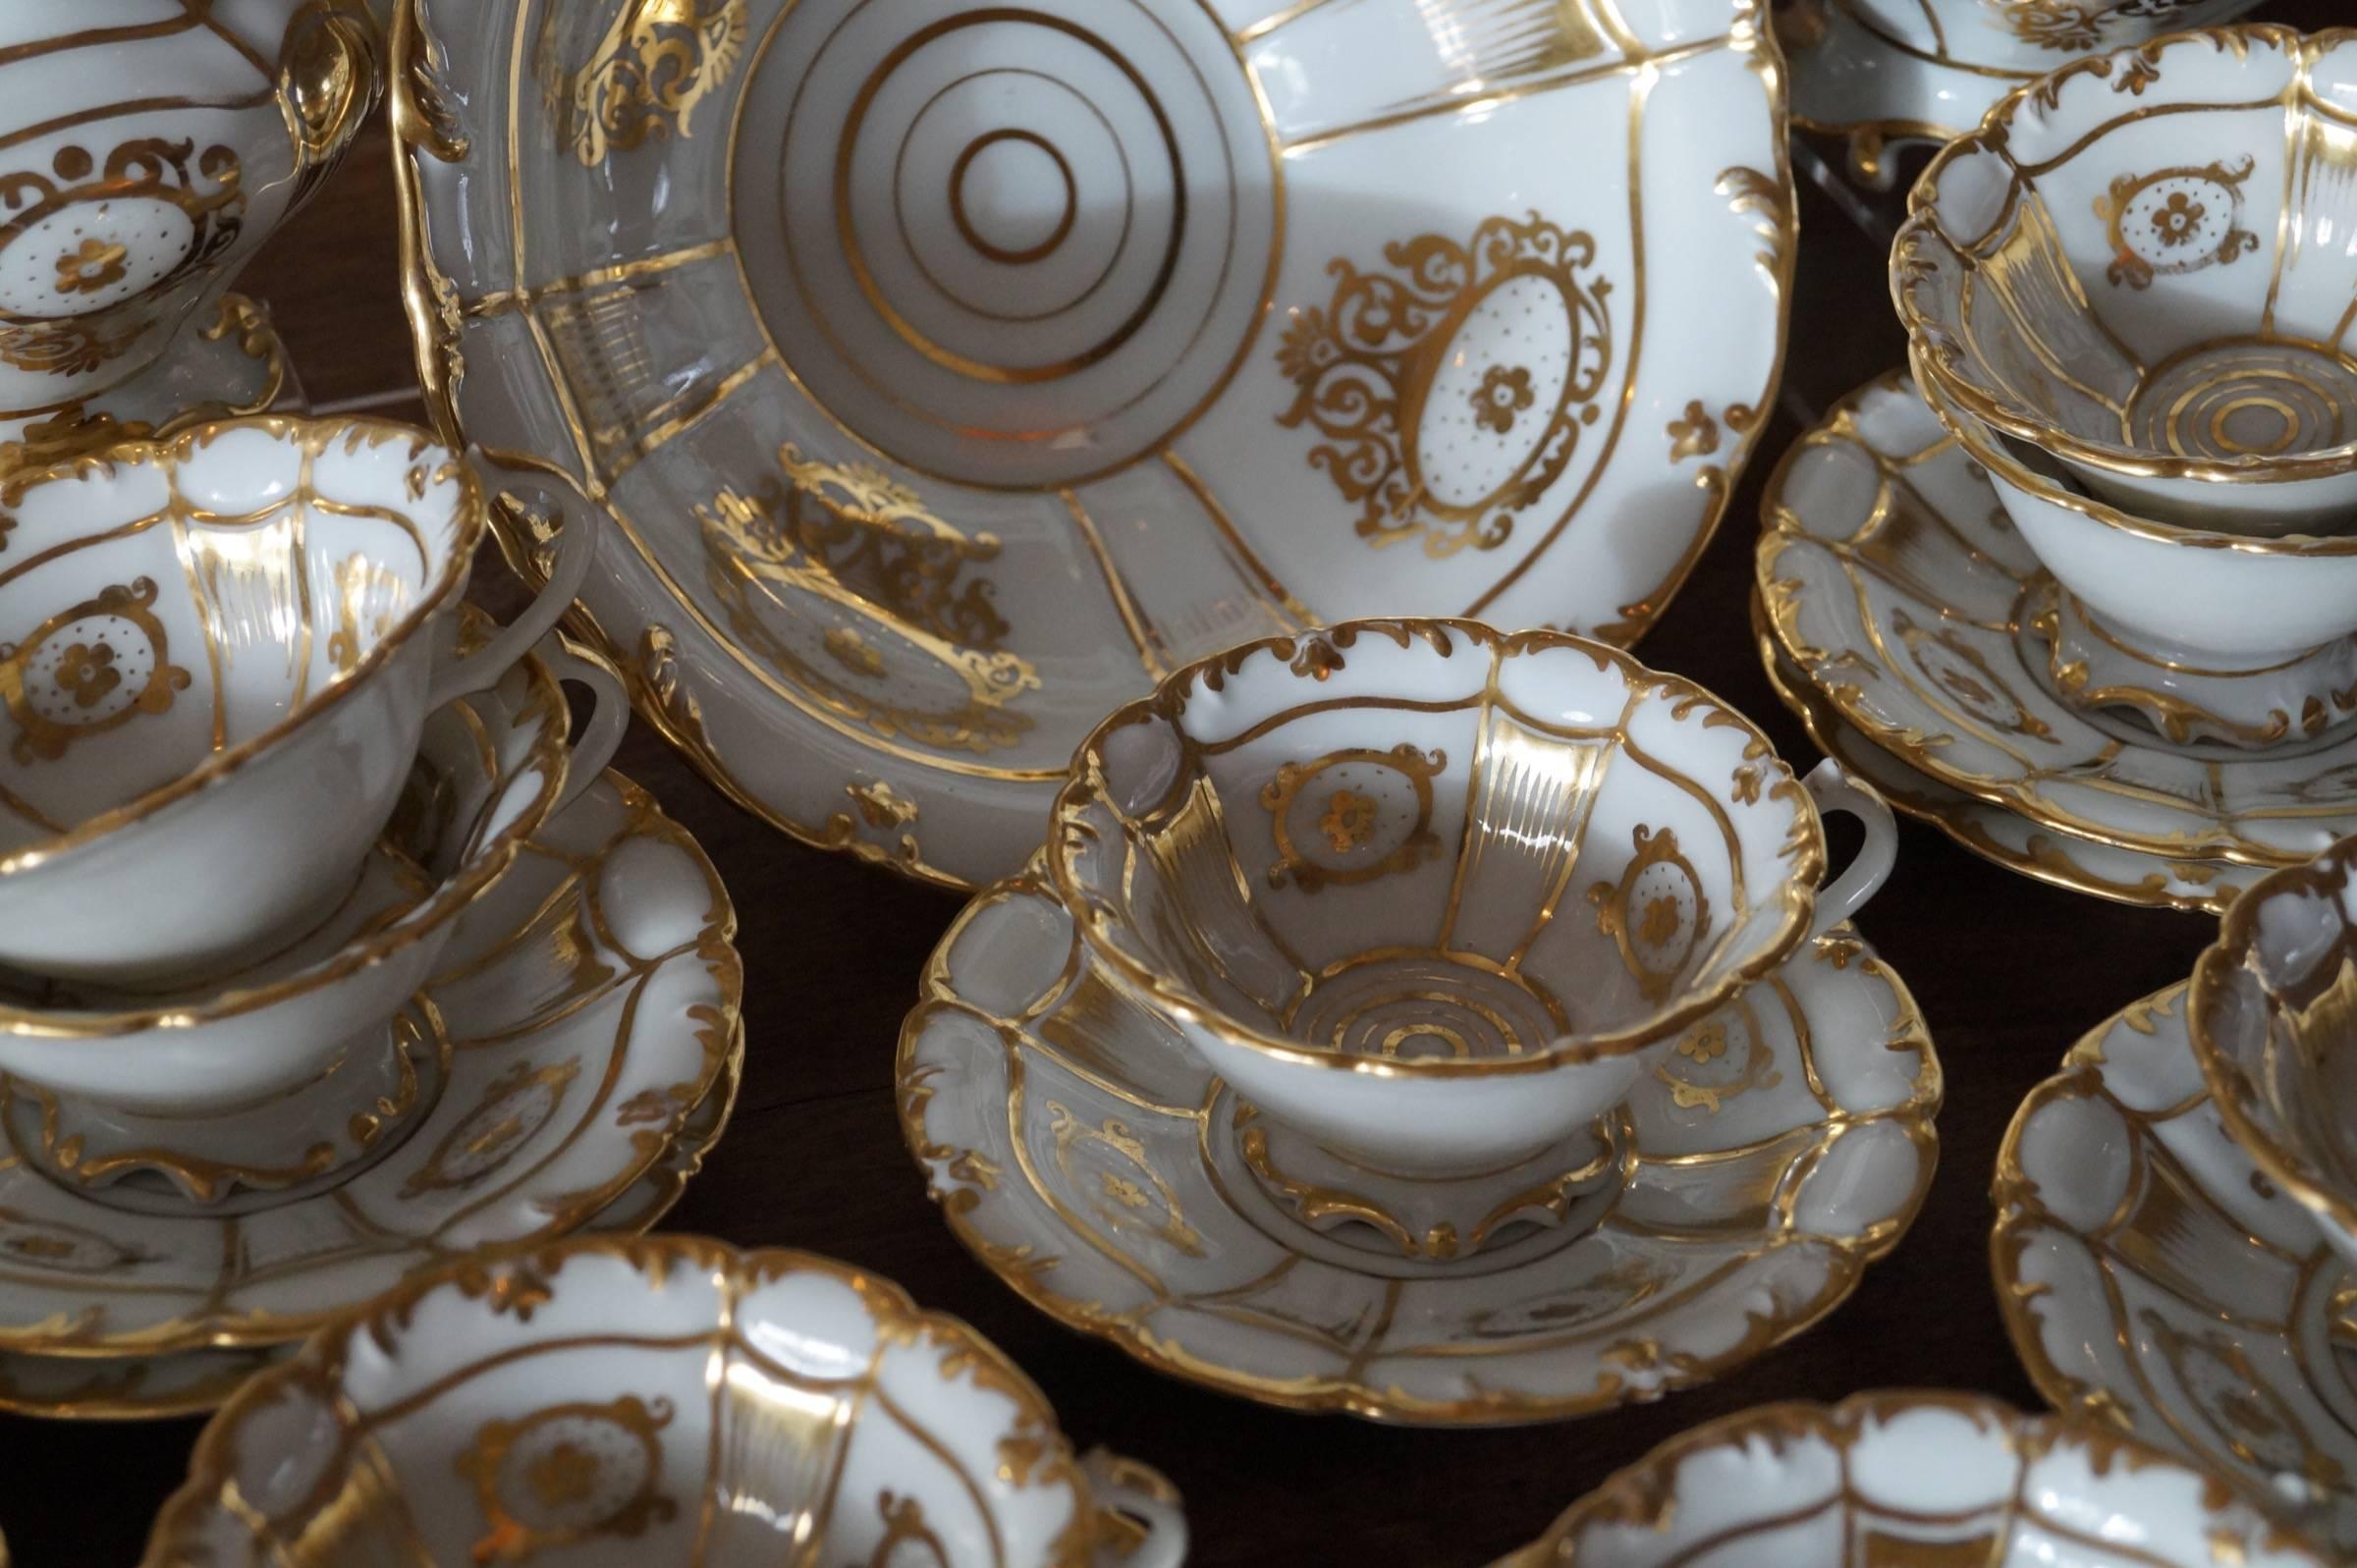 Richly gold decorated Old Paris porcelain tea service
France, circa 1880

Good condition. No wear and some very minor damage on some cups.

Measure: Teapot diameter 25cm - 19cm high 
Sugarpot diameter 17cm - high 16.5cm 
Creamer diameter 13cm